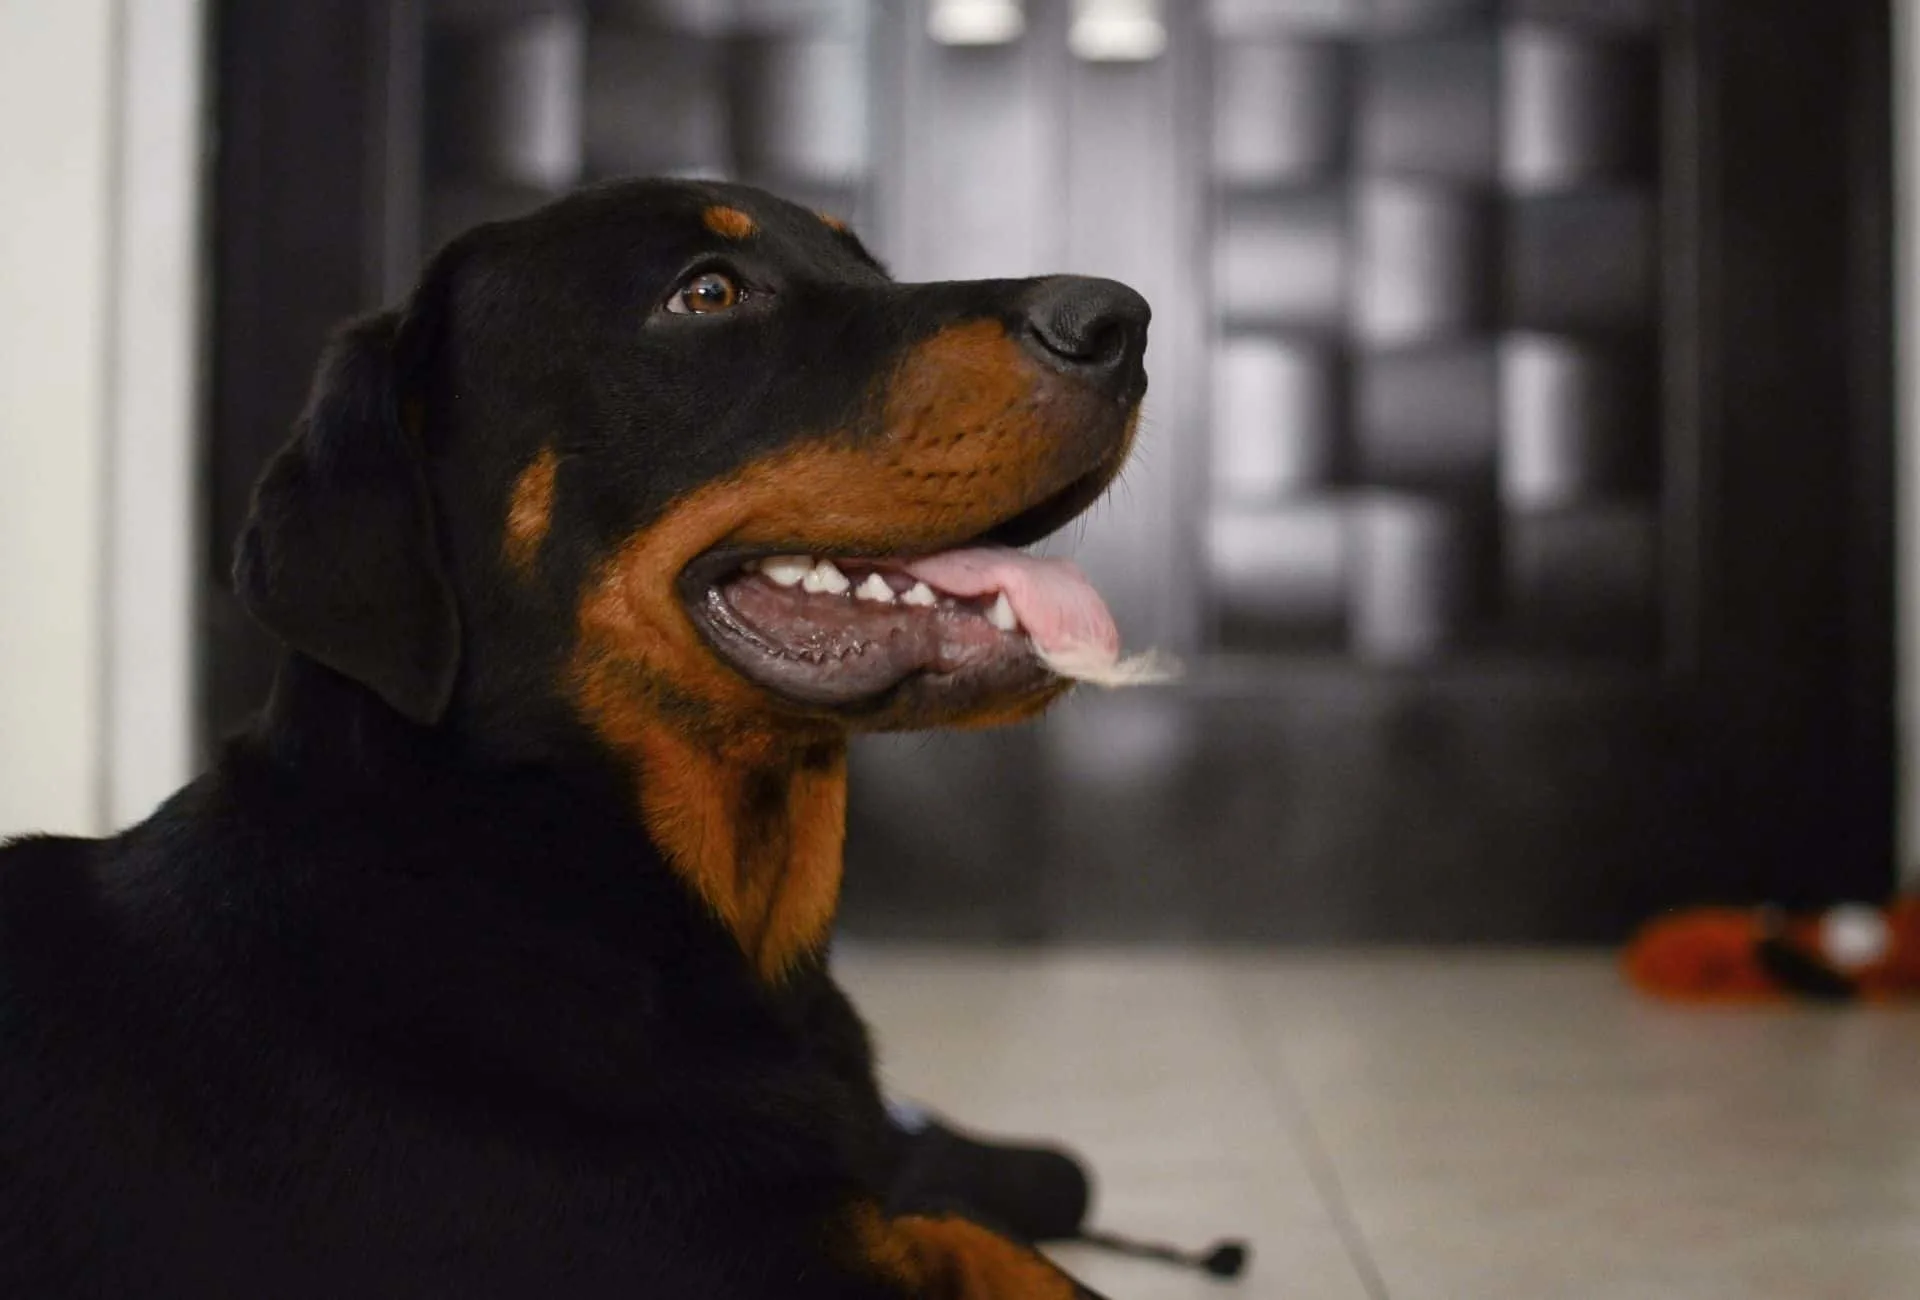 The Rotterman is a cross between Rottweiler and Doberman. This hybrid has a longer Doberman snout but the coat and head resembles the Rottweiler.